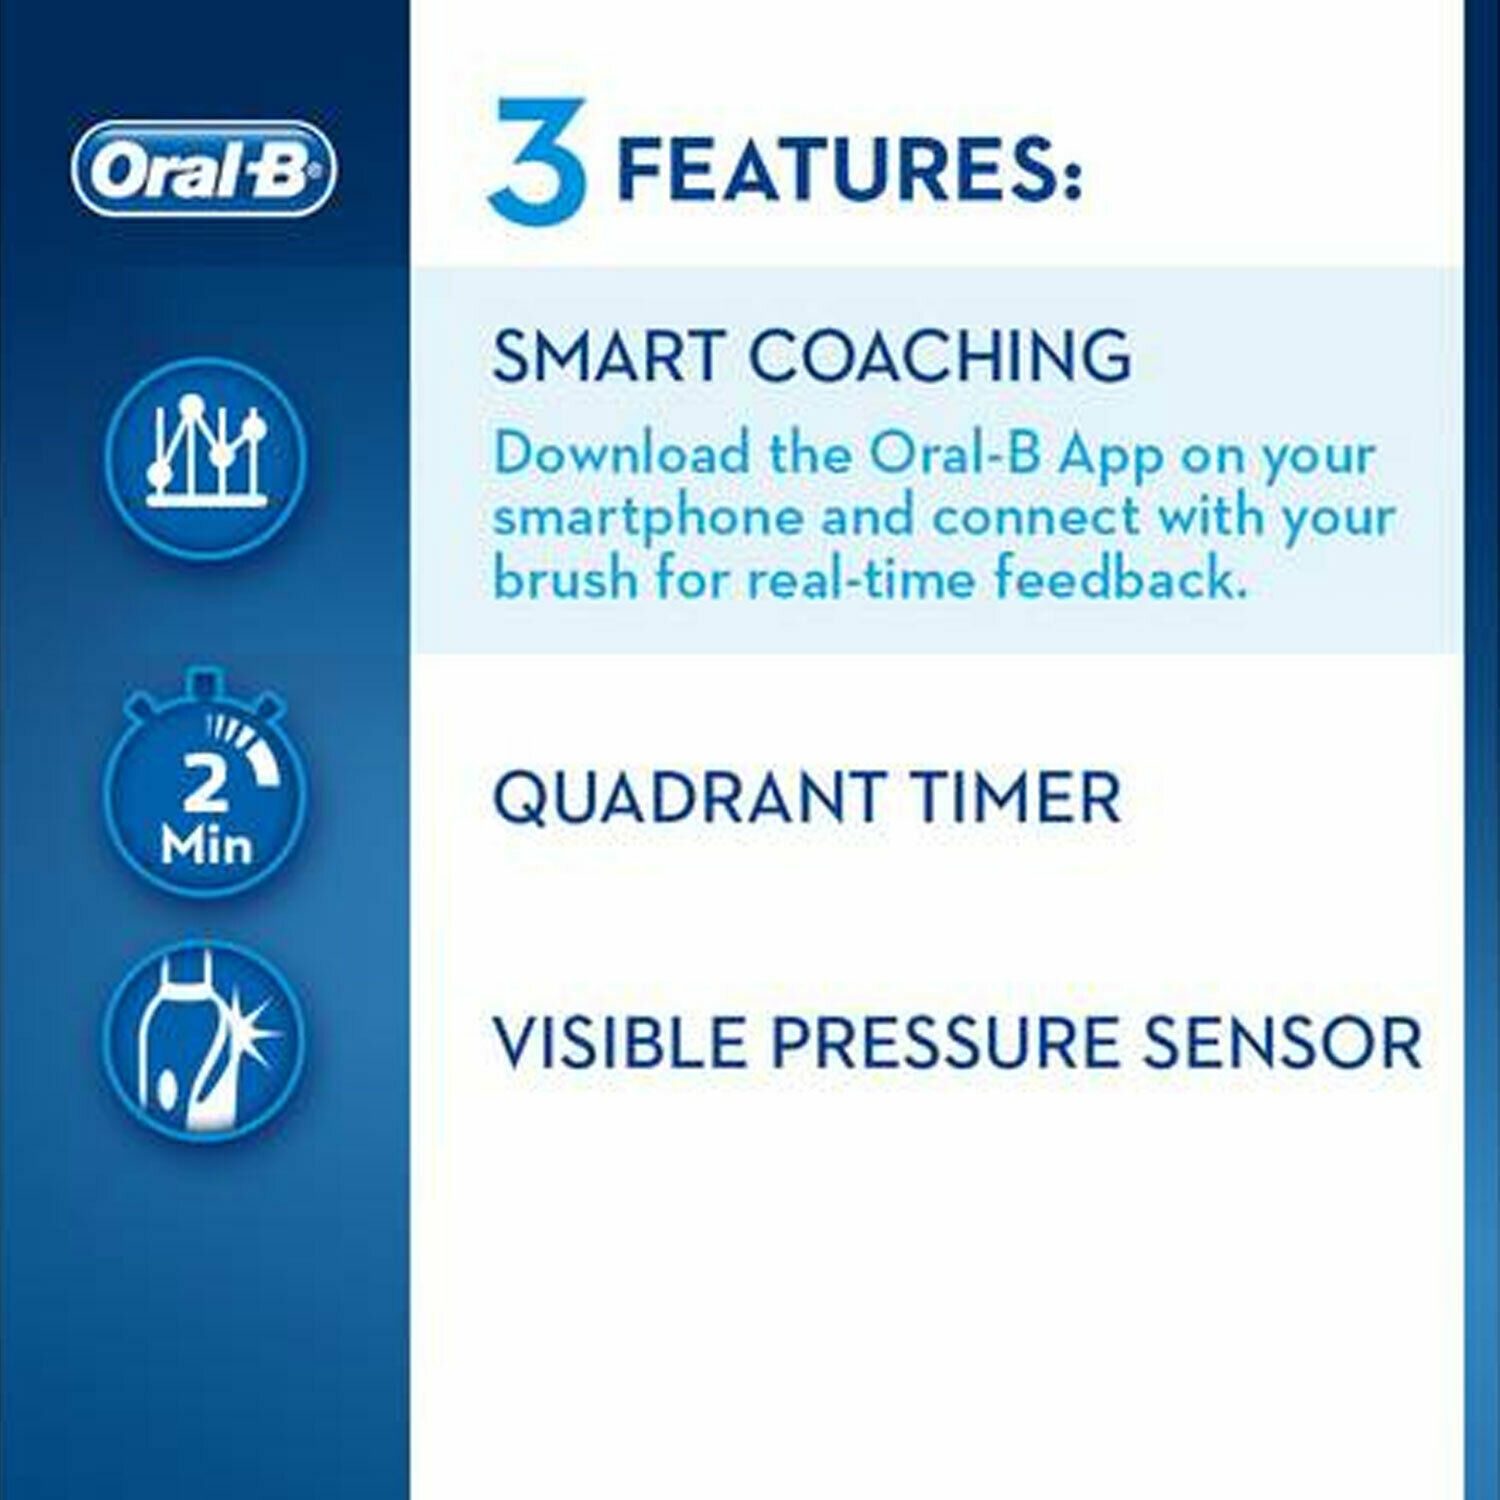 Oral-B Smart Series 4000 CrossAction Electric Toothbrush White

Get a healthier mouth in 1 weekThe Oral-B Smart Series 4000 CrossAction electric toothbrush combines superior cleaning* with Bluetooth connectivity to the Oral-B smartphone app to give you real-time feedback on your brushing habitsThe pressure sensor lights up if you brush too hard to prevent harmful over-brushing* vs. A regular manual toothbrush.

    Model number: oral-b smart series 4000 crossaction.
    Timer for better brushing.
    Quadpacer timer encourages attentive brushing of each quadrant of the mouth.
    4 cleaning modes: sensitive, massage, polish .
    2 brush heads: crossaction, sensitive clean brush head.
    3D rotate pulsate technology.
    3 speed settings.
    8800 rotations and 40000 pulsations per minute.
    Ergonomic handle - to make the brush more comfortable to hold and use.
    Recharge indicator light.
    Visual pressure sensor stops pulsations when you brush too hard.
    Replacement head included.
    Rechargeable: 12 hours for full charge.
    48 minutes usage time, based on 2 minutes twice a day.


From the Manufacturer

Round cleans better
Oral-B's round head contours to each tooth for cleaner teeth and healthier gums versus a standard manual toothbrush.
	
Whiter teeth as of day one
Gently whitens your teeth starting as of day one with polishing cup that holds toothpaste and delivers it where is needed to remove surface stains.
	
Brush for the right amount of time
The built-in timer helps you brush for at least two minutes, the minimum brushing time dentists and hygienists recommend.
	
Protect your gums
Pressure control reduces brushing speed and alerts you if you are brushing too hard.

Better brushing habits
Oral-B Smart 4 4000N connects with the Oral-B App enabling Smart Coaching. The App provides you real-time feedback to help you improve your routine and track your progress.
	
Two plus weeks of brushing with one charge
The Oral-B Smart 4 4000N has a state of the art Lithium-Ion battery to last more than two weeks. This way you don't need to worry about getting your charger during your holidays.
	
Brush heads designed with dentists
Oral-B Refills are designed to perfectly fit your toothbrush and come with specialised features for amazing results like end rounding to be gentle on gums, angled bristles to clean in-between teeth, and UltraThin bristles for extra gentle cleaning.
	
Number one dentist recommended*
Oral-B is not only designed with dentists, it is also the number one toothbrush brand recommended by dentists worldwide*. Discover yourself the next level of oral care by Oral-B.

*Based on surveys of a representative worldwide sample of dentists carried out for P&G regularly


Not Available for the following postcodes:
AB, BT, DB99, DD9-11, EH35-46, FK18-21, AB, BT, DB99, GY, HS, IM, IV, KA27, KA28, KW, KY9-16, PA, PH, PO30-41, TD, TR21-25, ZE